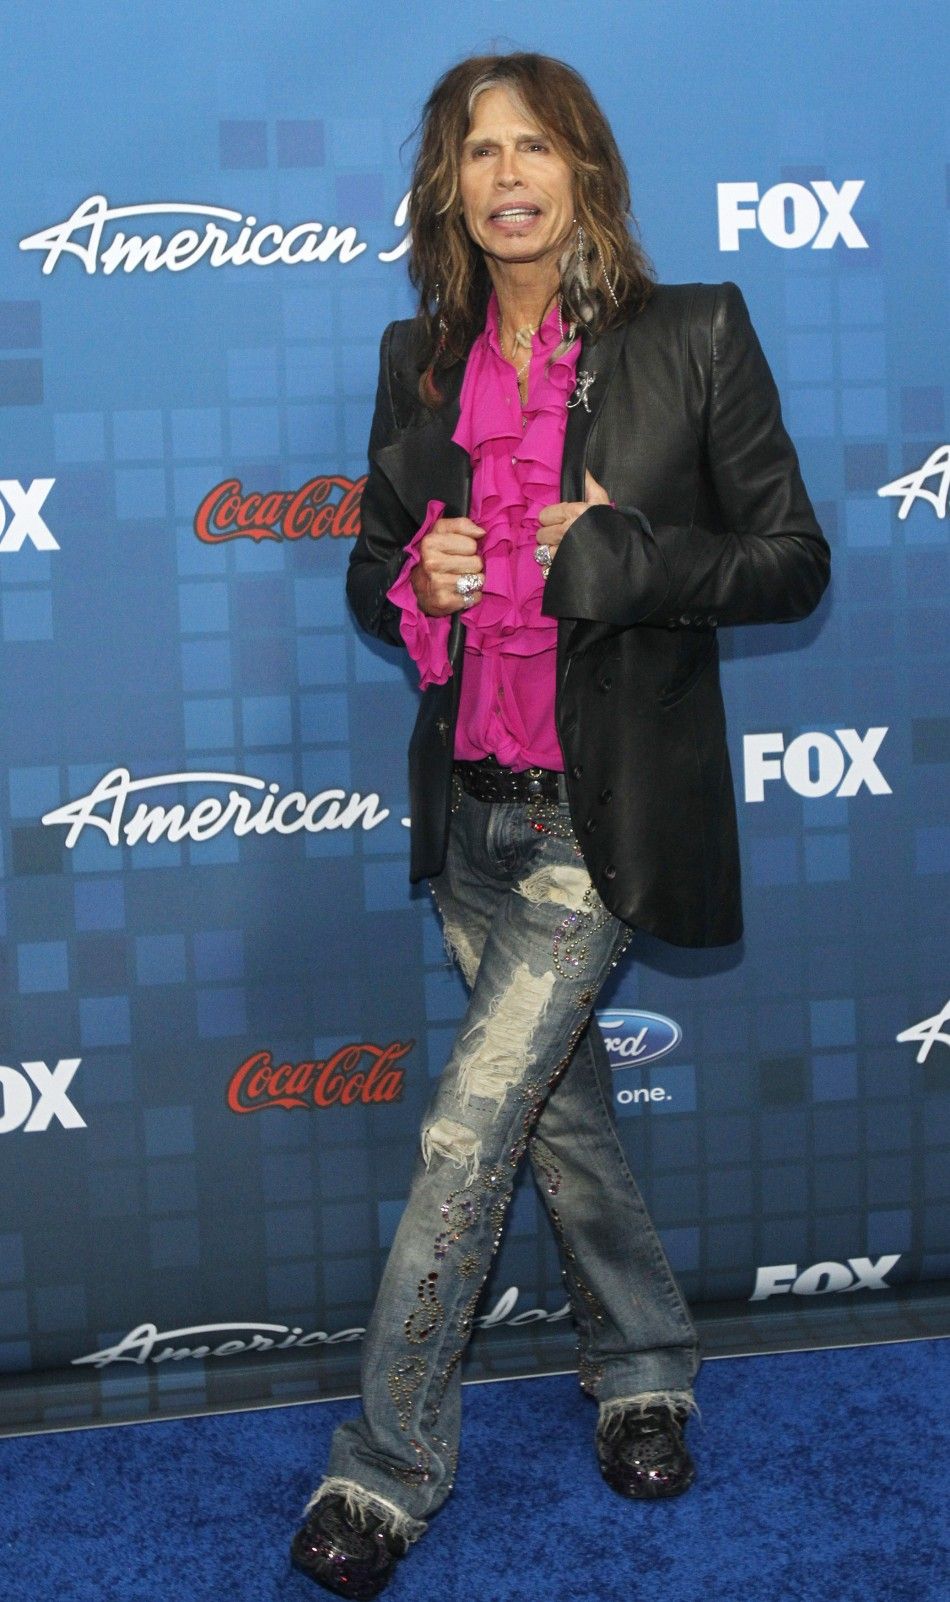 American Idol judge Steven Tyler poses at the party for the finalists of the television show quotAmerican Idolquot in Los Angeles March 3, 2011. 